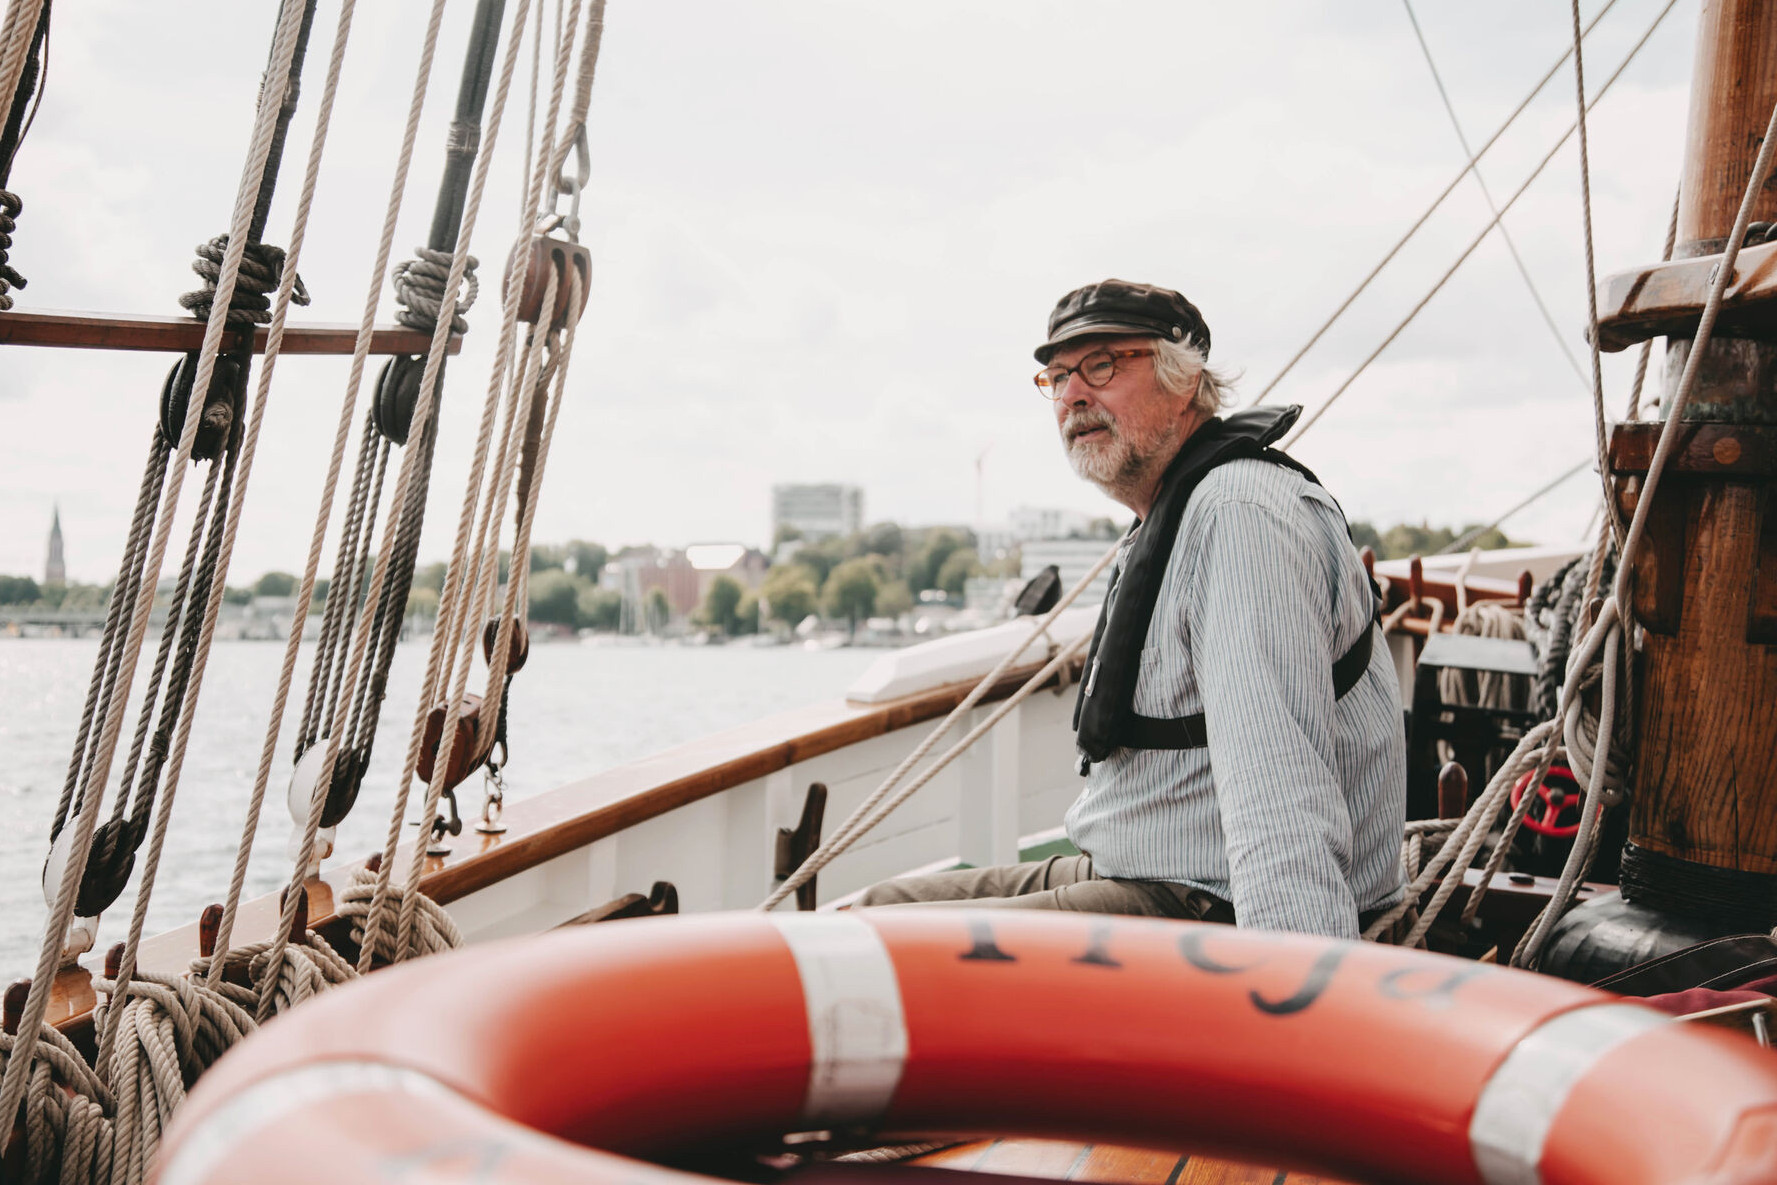  A traditional sailor reports: Andreas Köpke is a passionate sailor. He has been sailing the seas of the world with his traditional sailing vessel for 35 years.